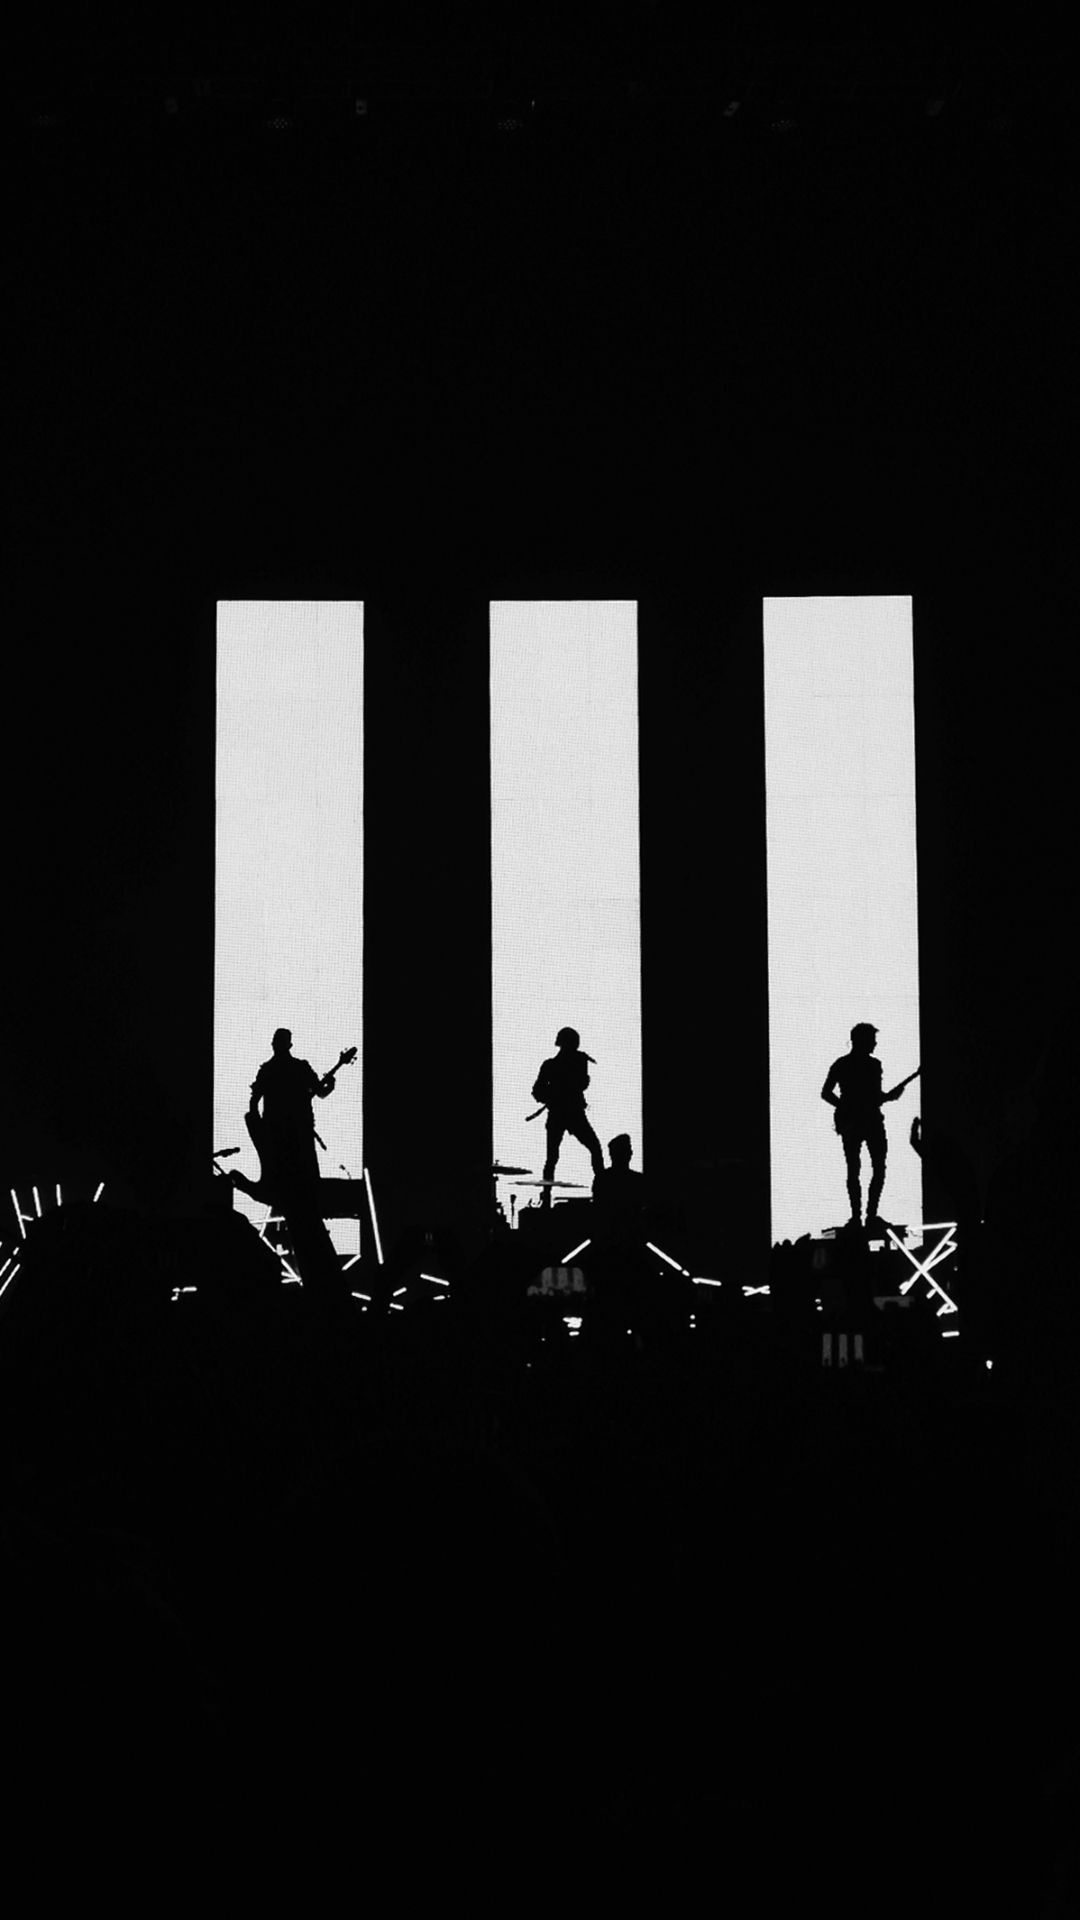 Paramore: The tour with New Found Glory, Black and white. 1080x1920 Full HD Wallpaper.